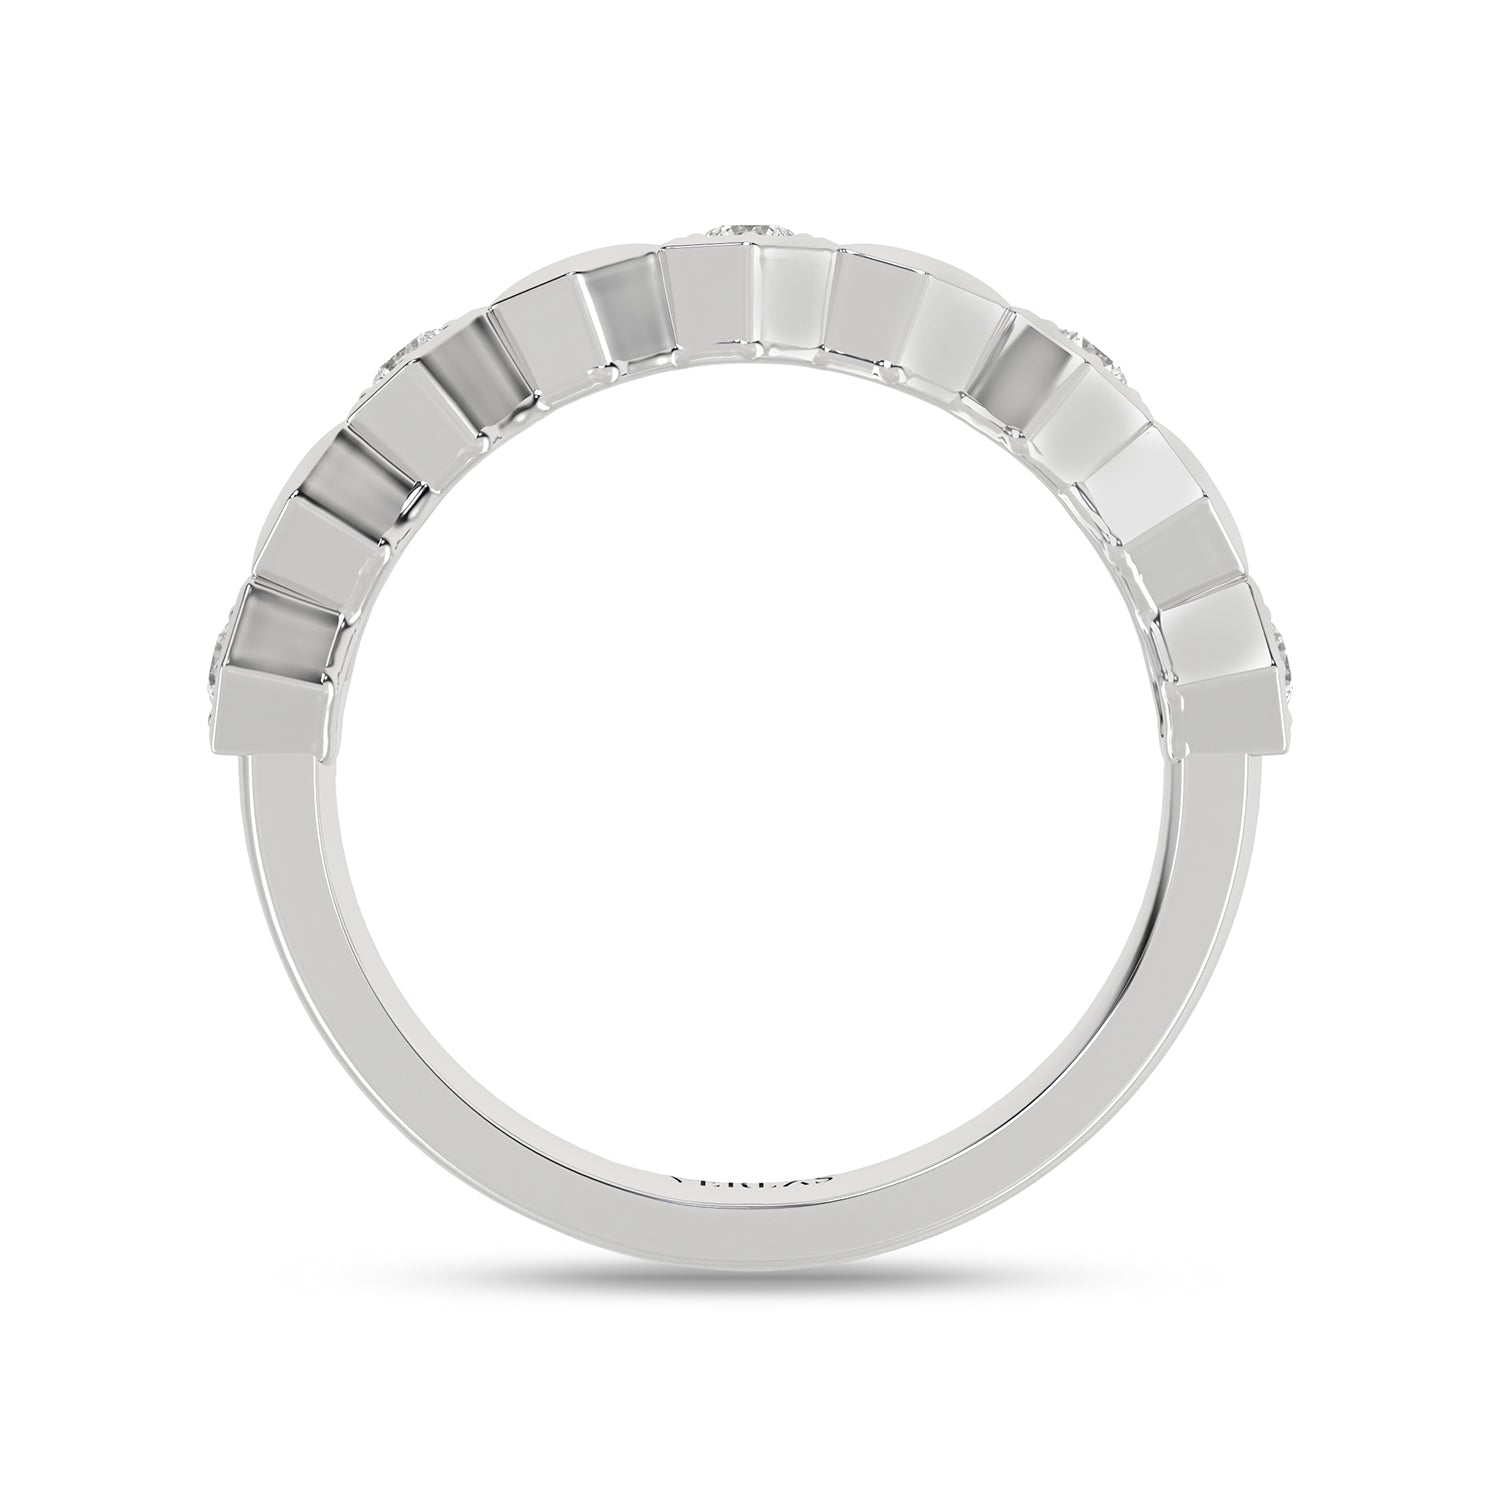 Essential 4-Pronged Round Ring_Product Angle_1/6 Ct. - 3